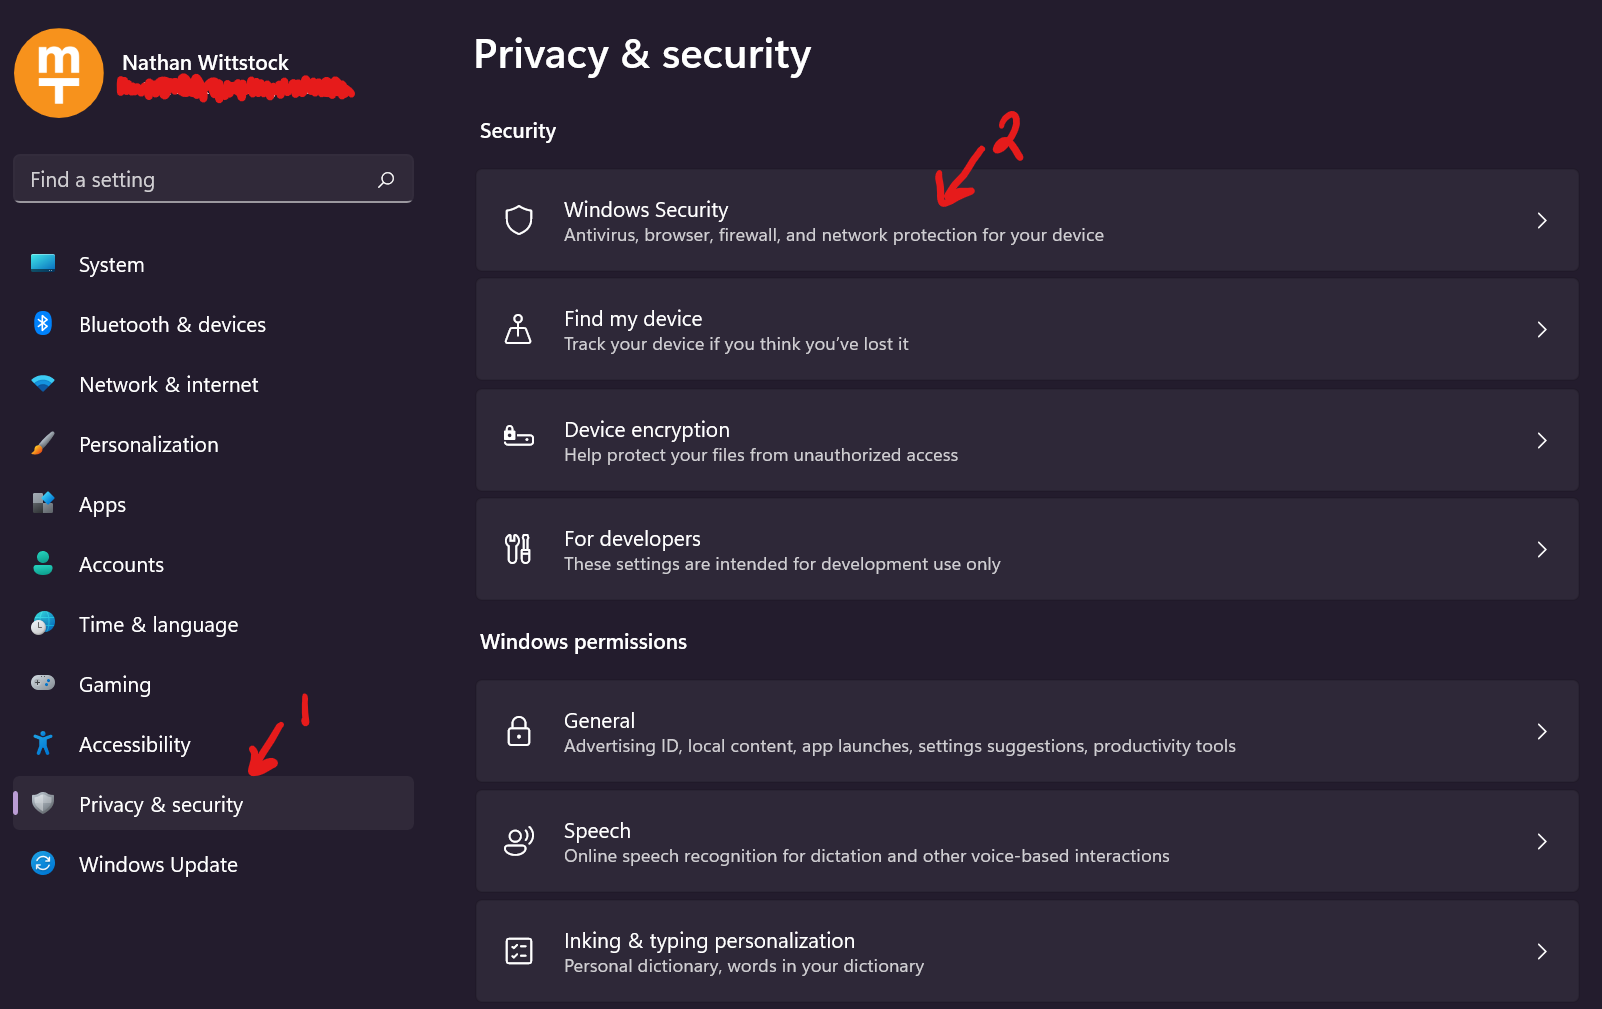 In Settings, click &ldquo;Privacy & Security&rdquo; followed by &ldquo;Windows Security&rdquo;